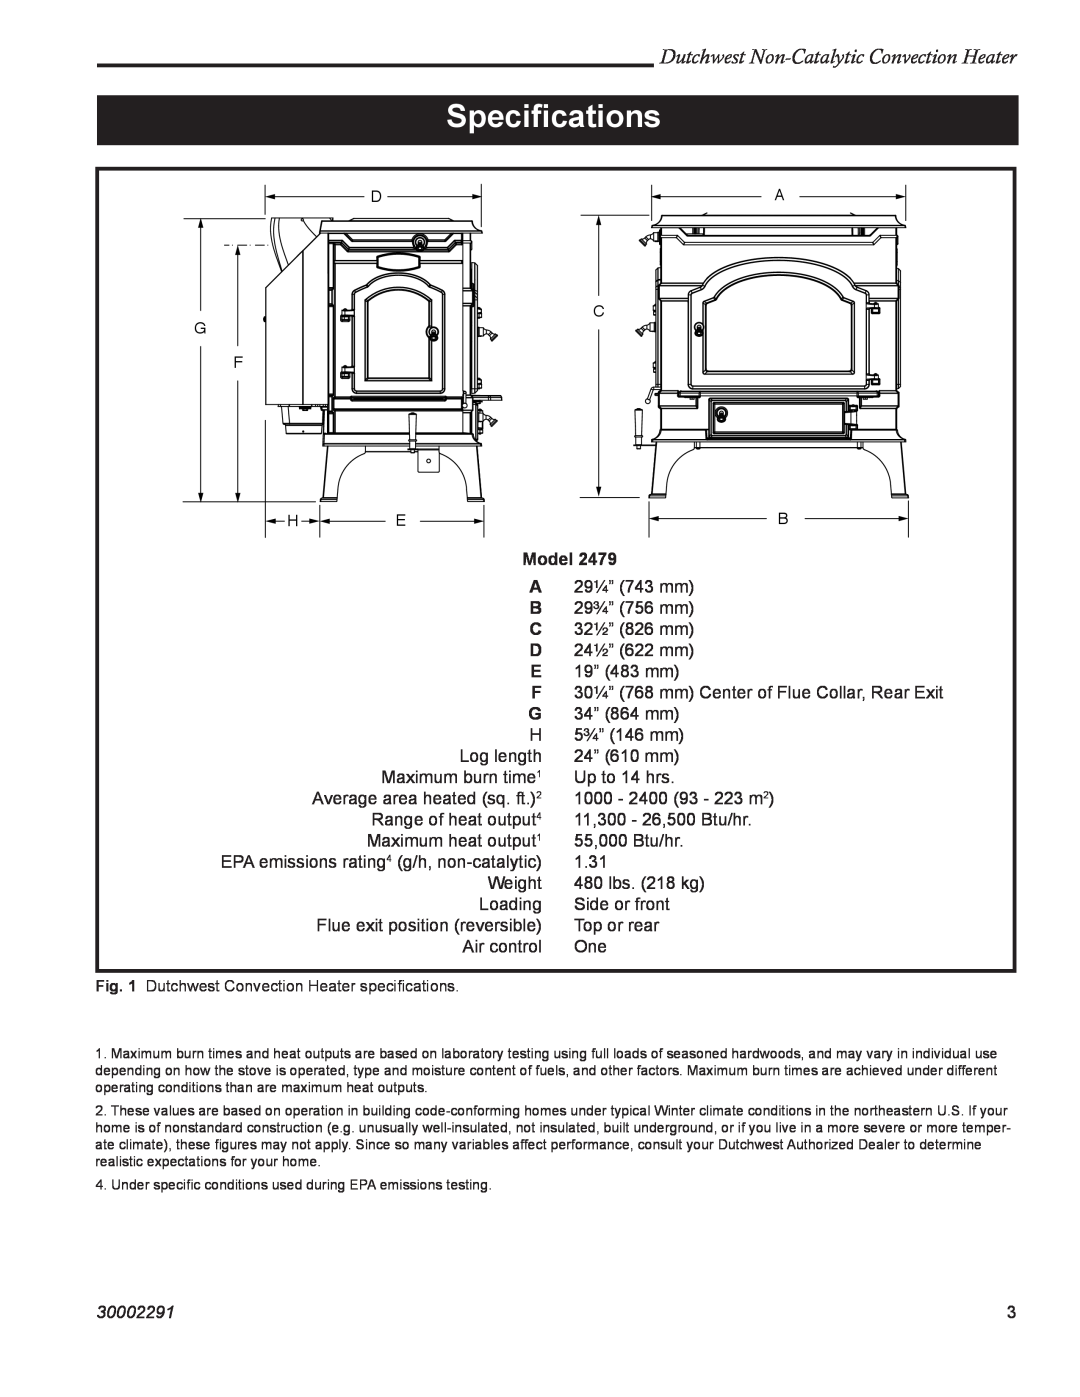 Vermont Casting 2479 manual Speciﬁcations, Dutchwest Non-CatalyticConvection Heater, Model, 30002291 